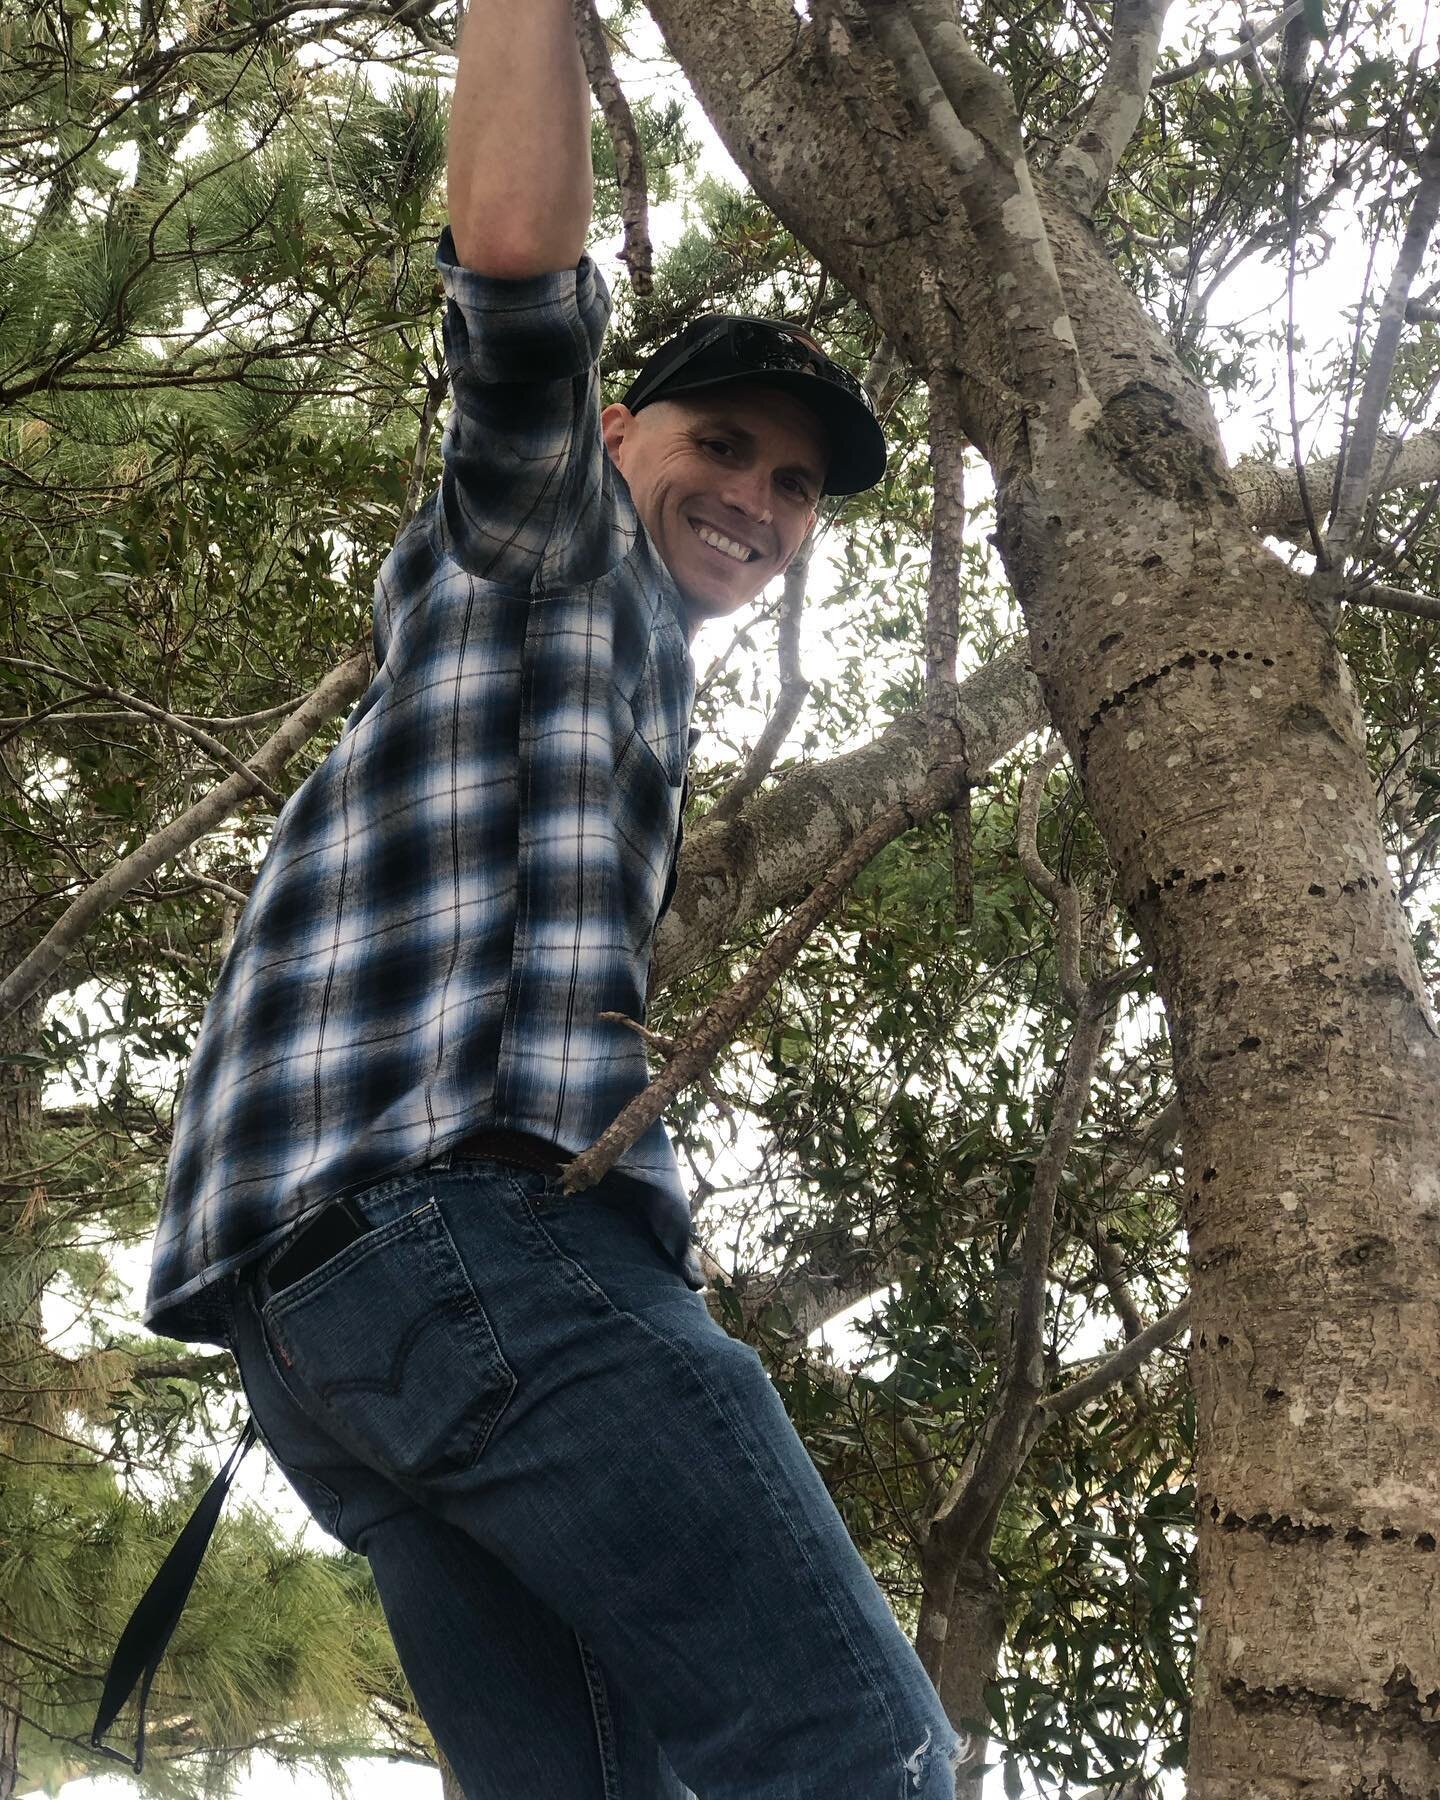 I love @geocaching . Even the #dnf are a ton of fun and usually involve a LO up a tree! This was from my VB visit a couple of months ago. We are way overdue for another adventure! @landolg_baseball #geocaching #geocacher #geocachingadventures